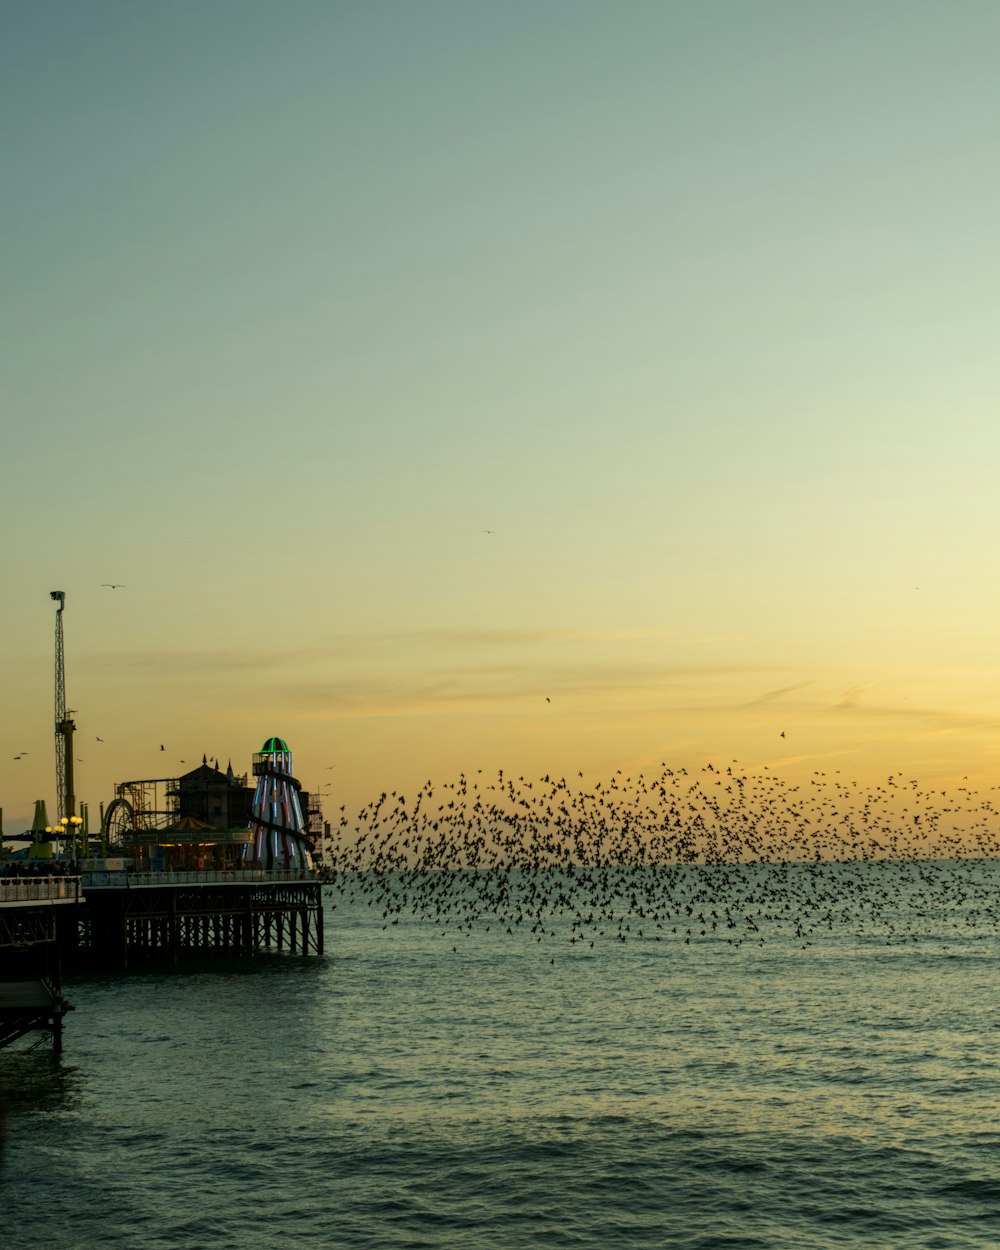 time-lapse photography of flock of birds flying above the sea